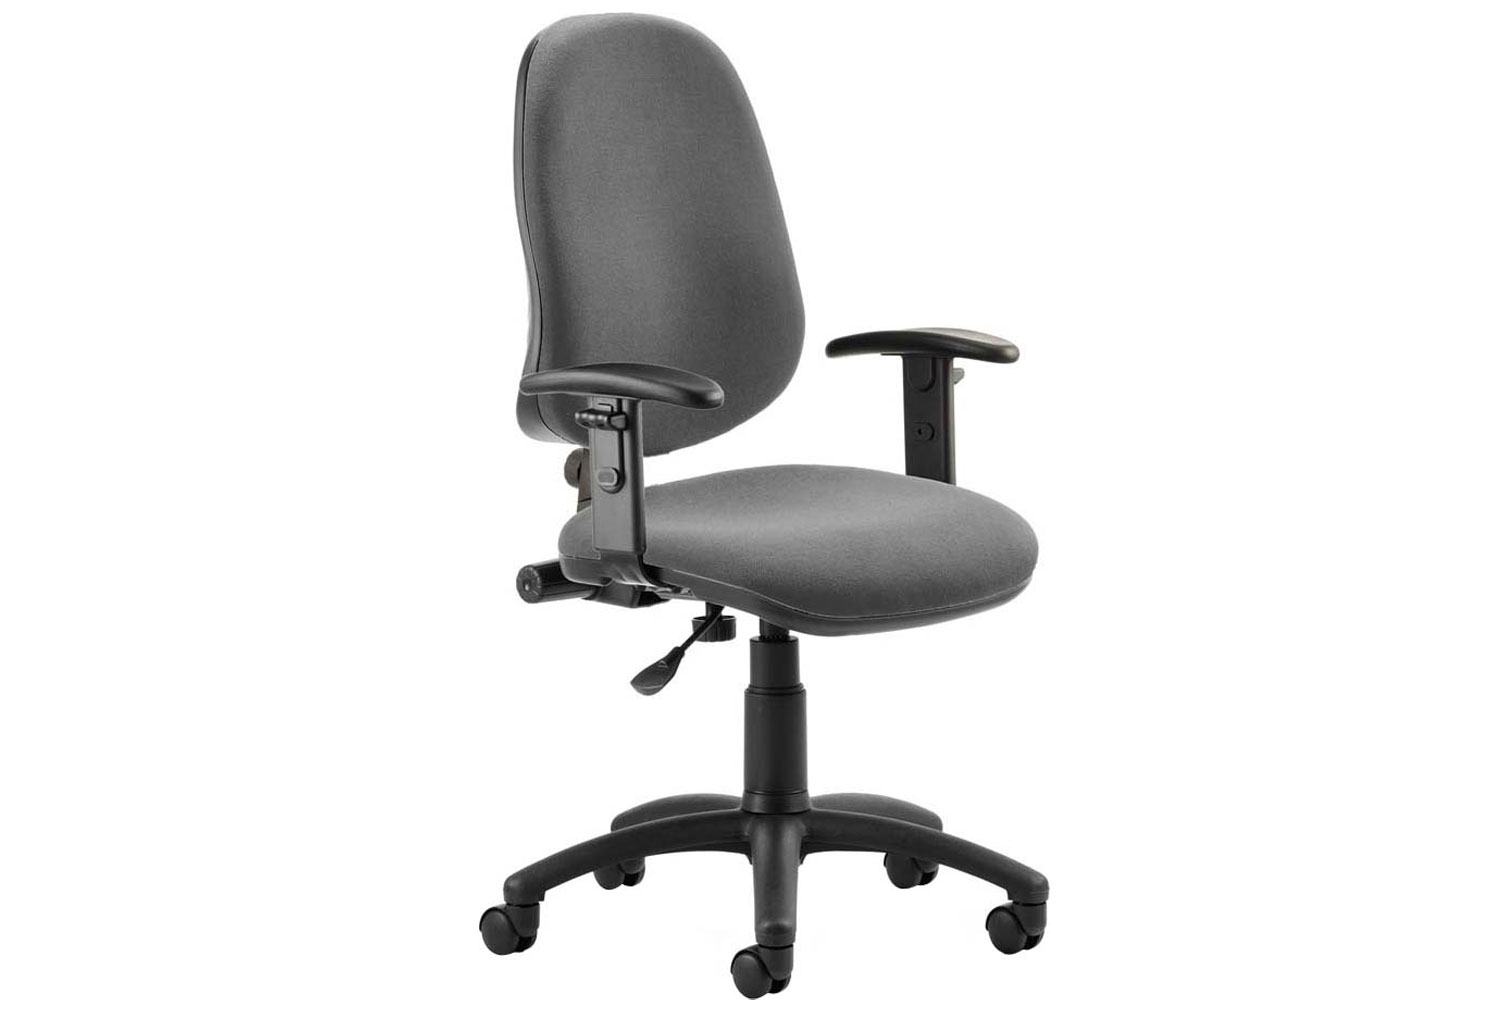 Lunar 1 Lever Operator Office Chair With Height Adjustable Arms, Charcoal, Fully Installed